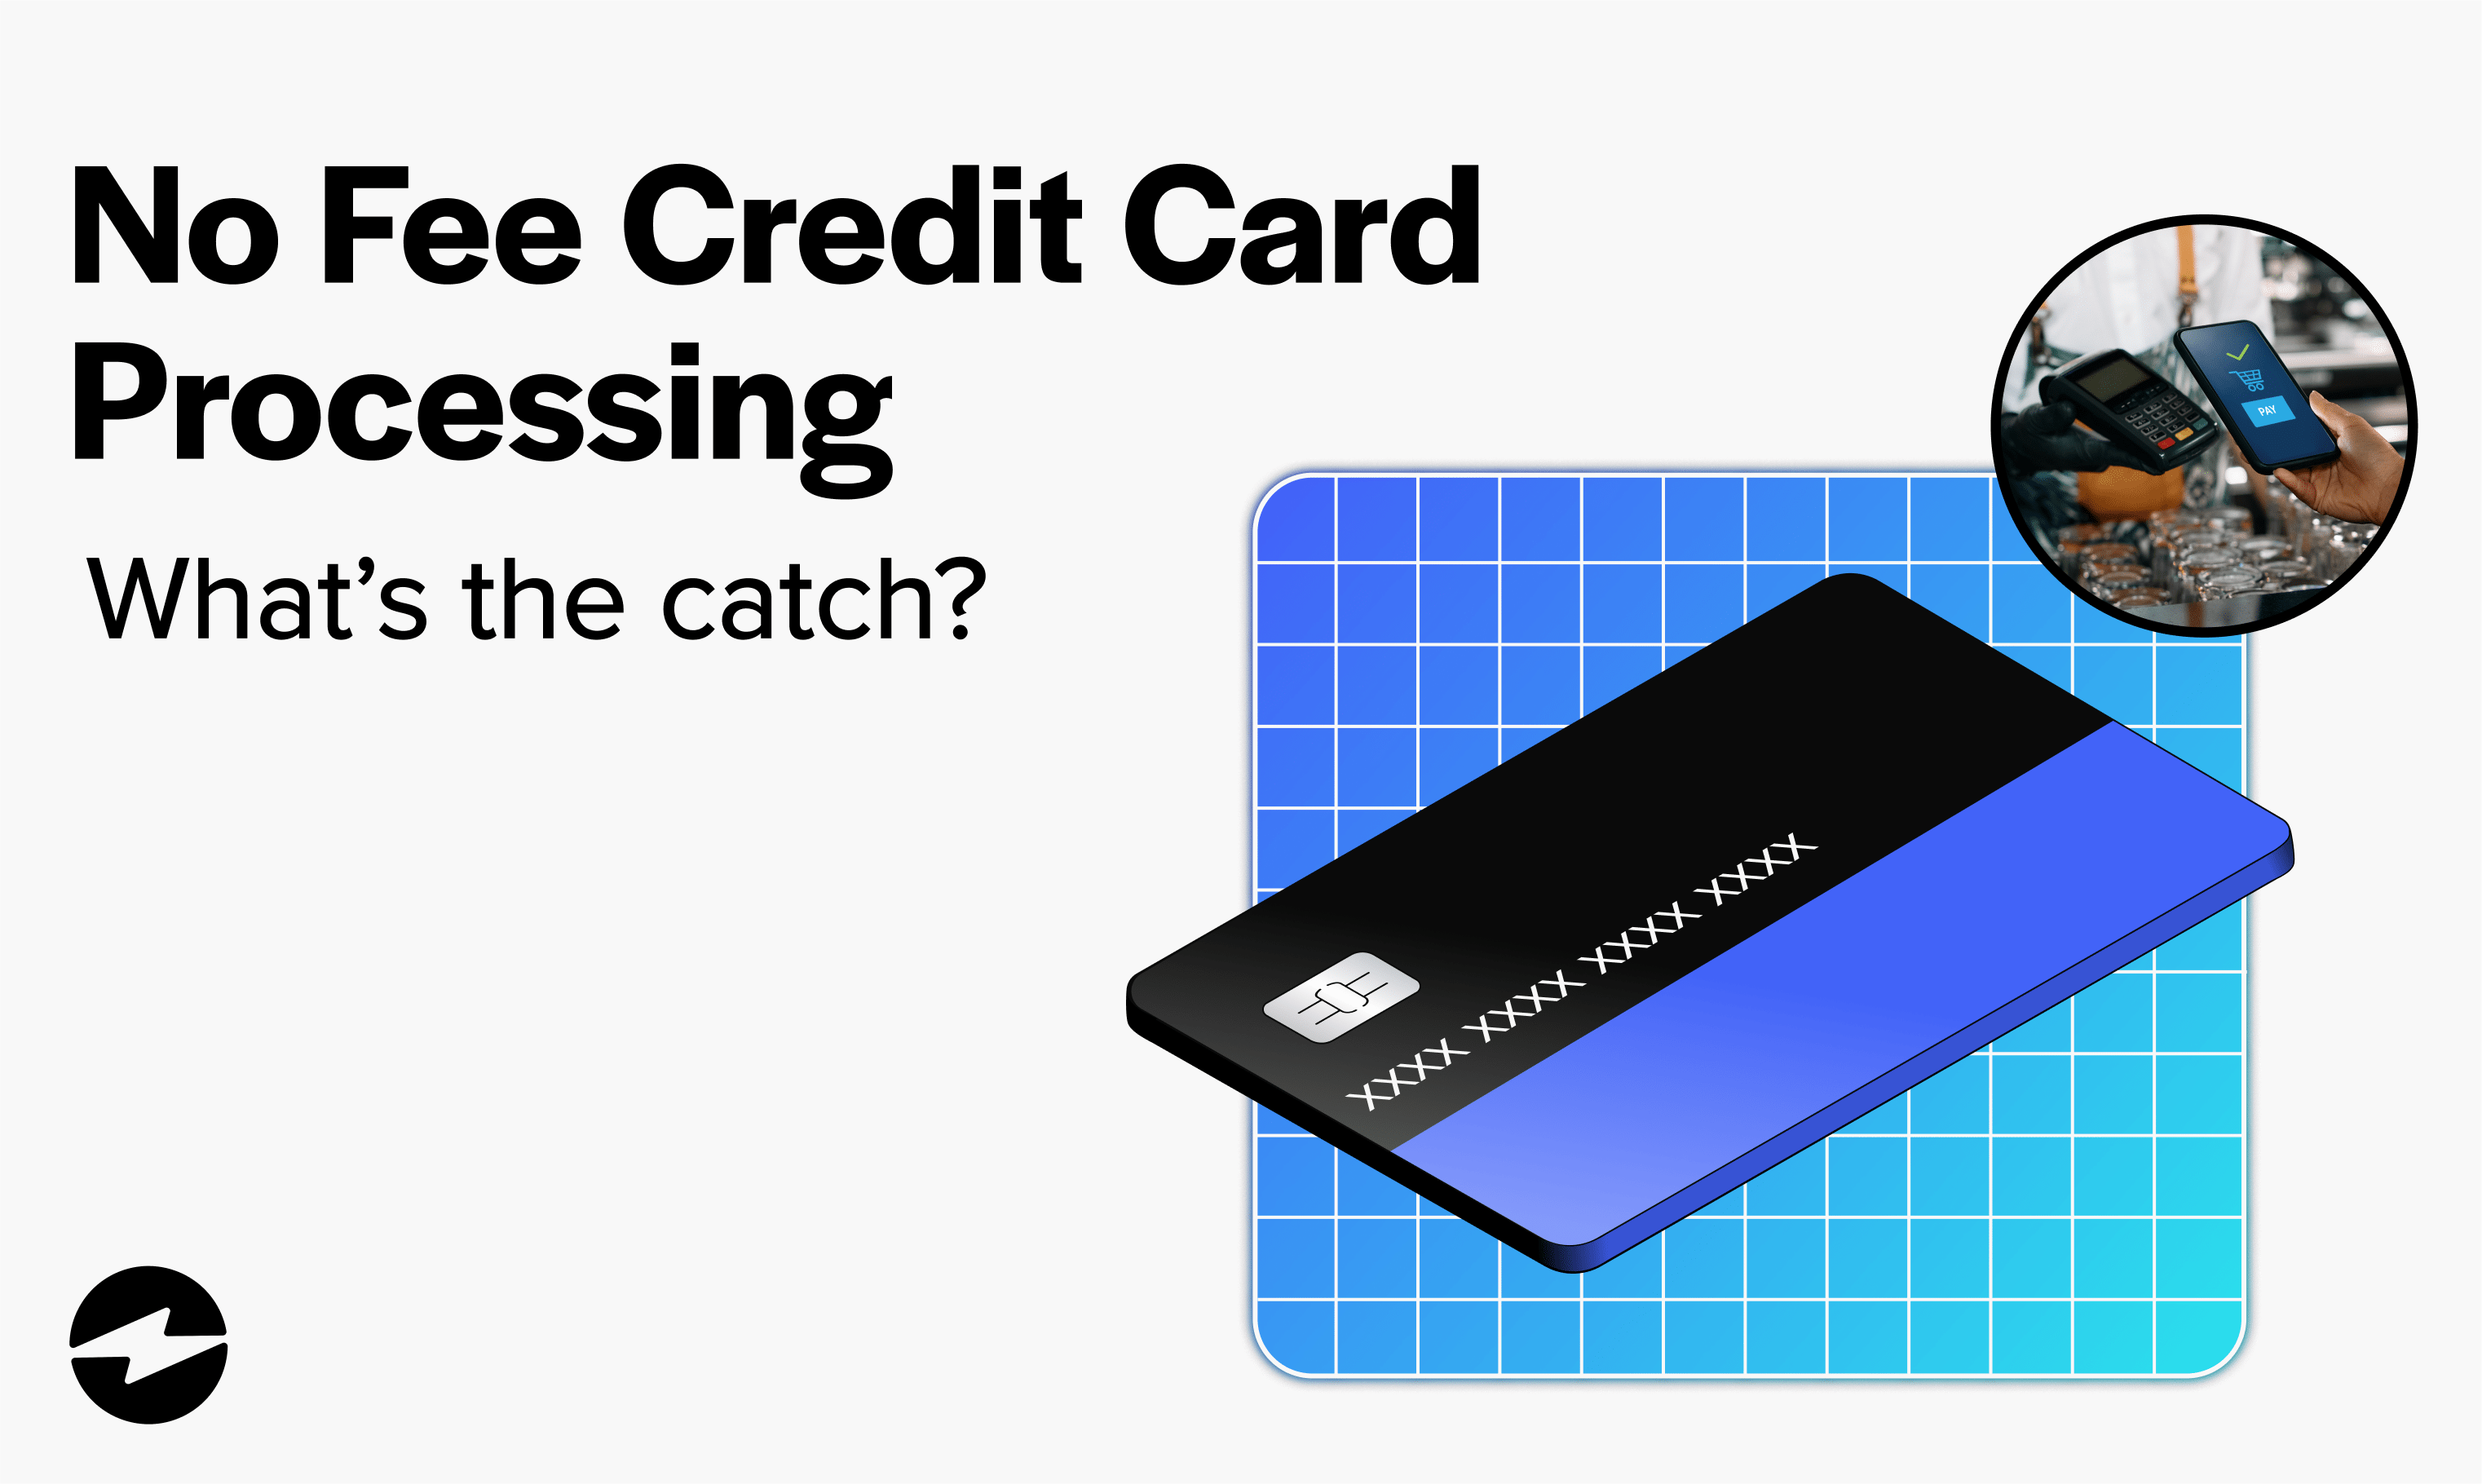 No Fee Credit Card Processing: What's the Catch